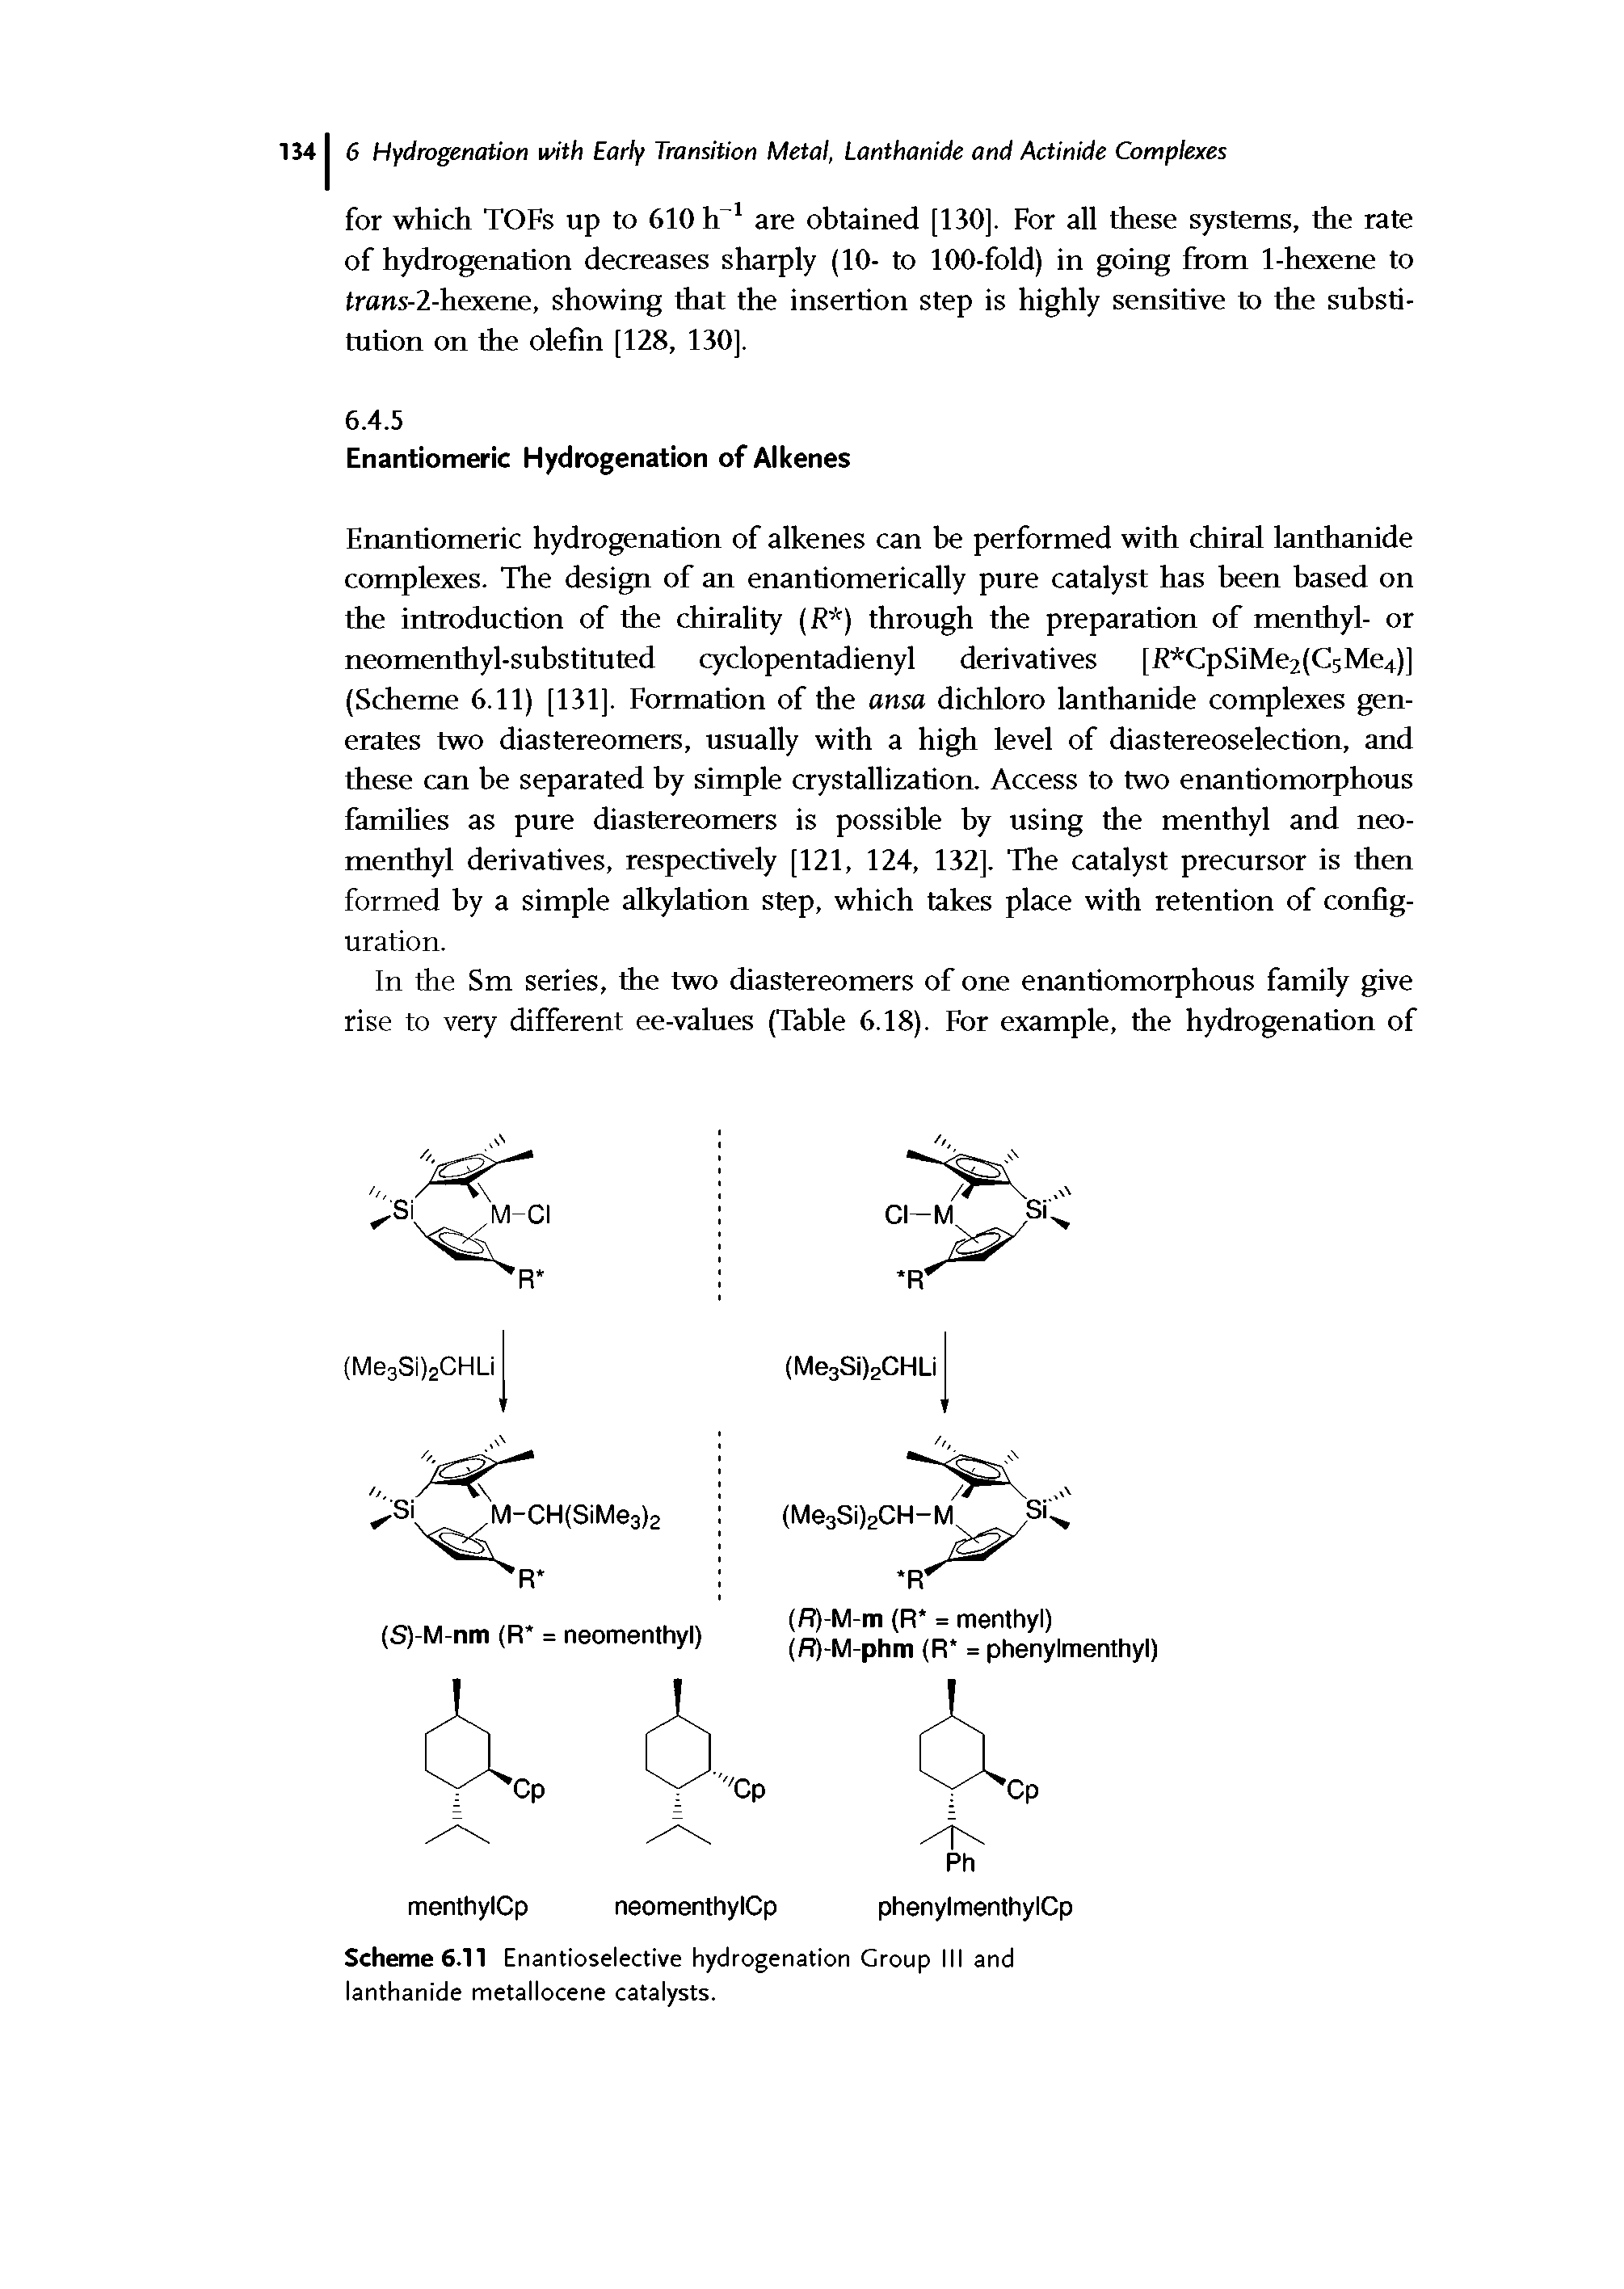 Scheme 6.11 Enantioselective hydrogenation Group III and lanthanide metallocene catalysts.